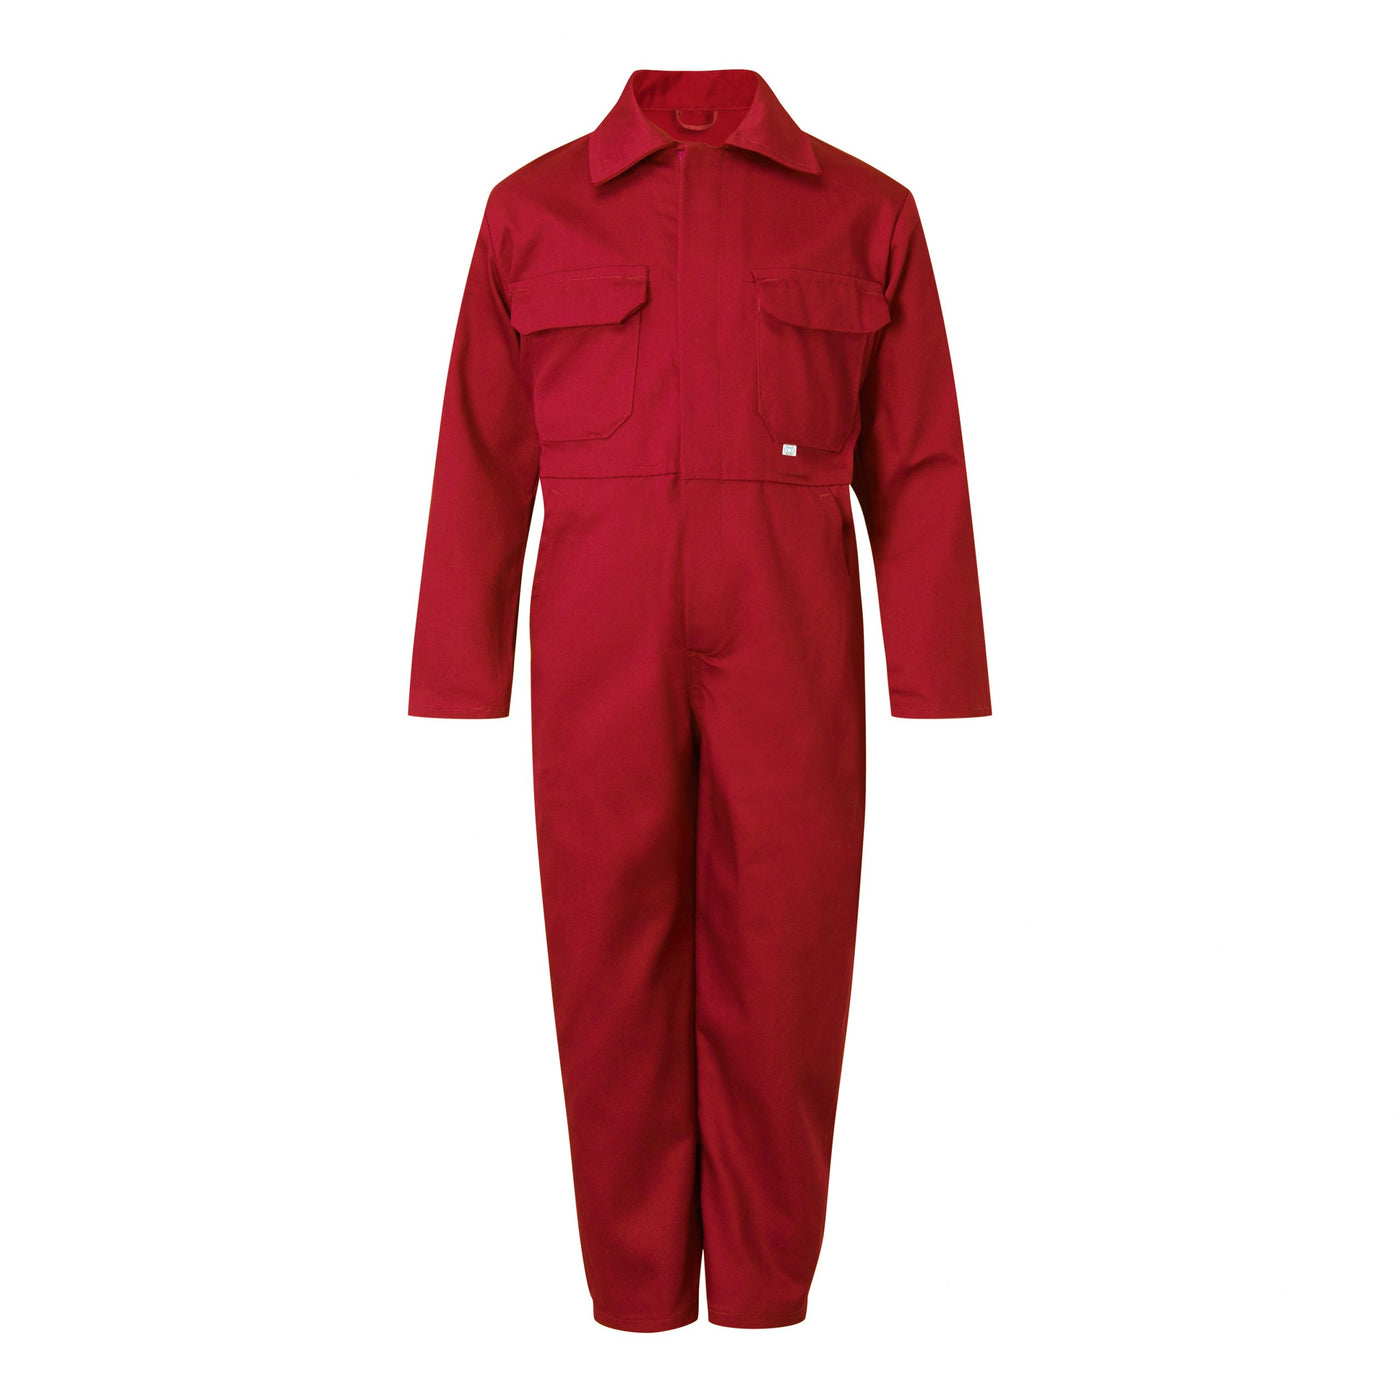 Castle Clothing Fort 333 Tearaway Junior Coverall, Red